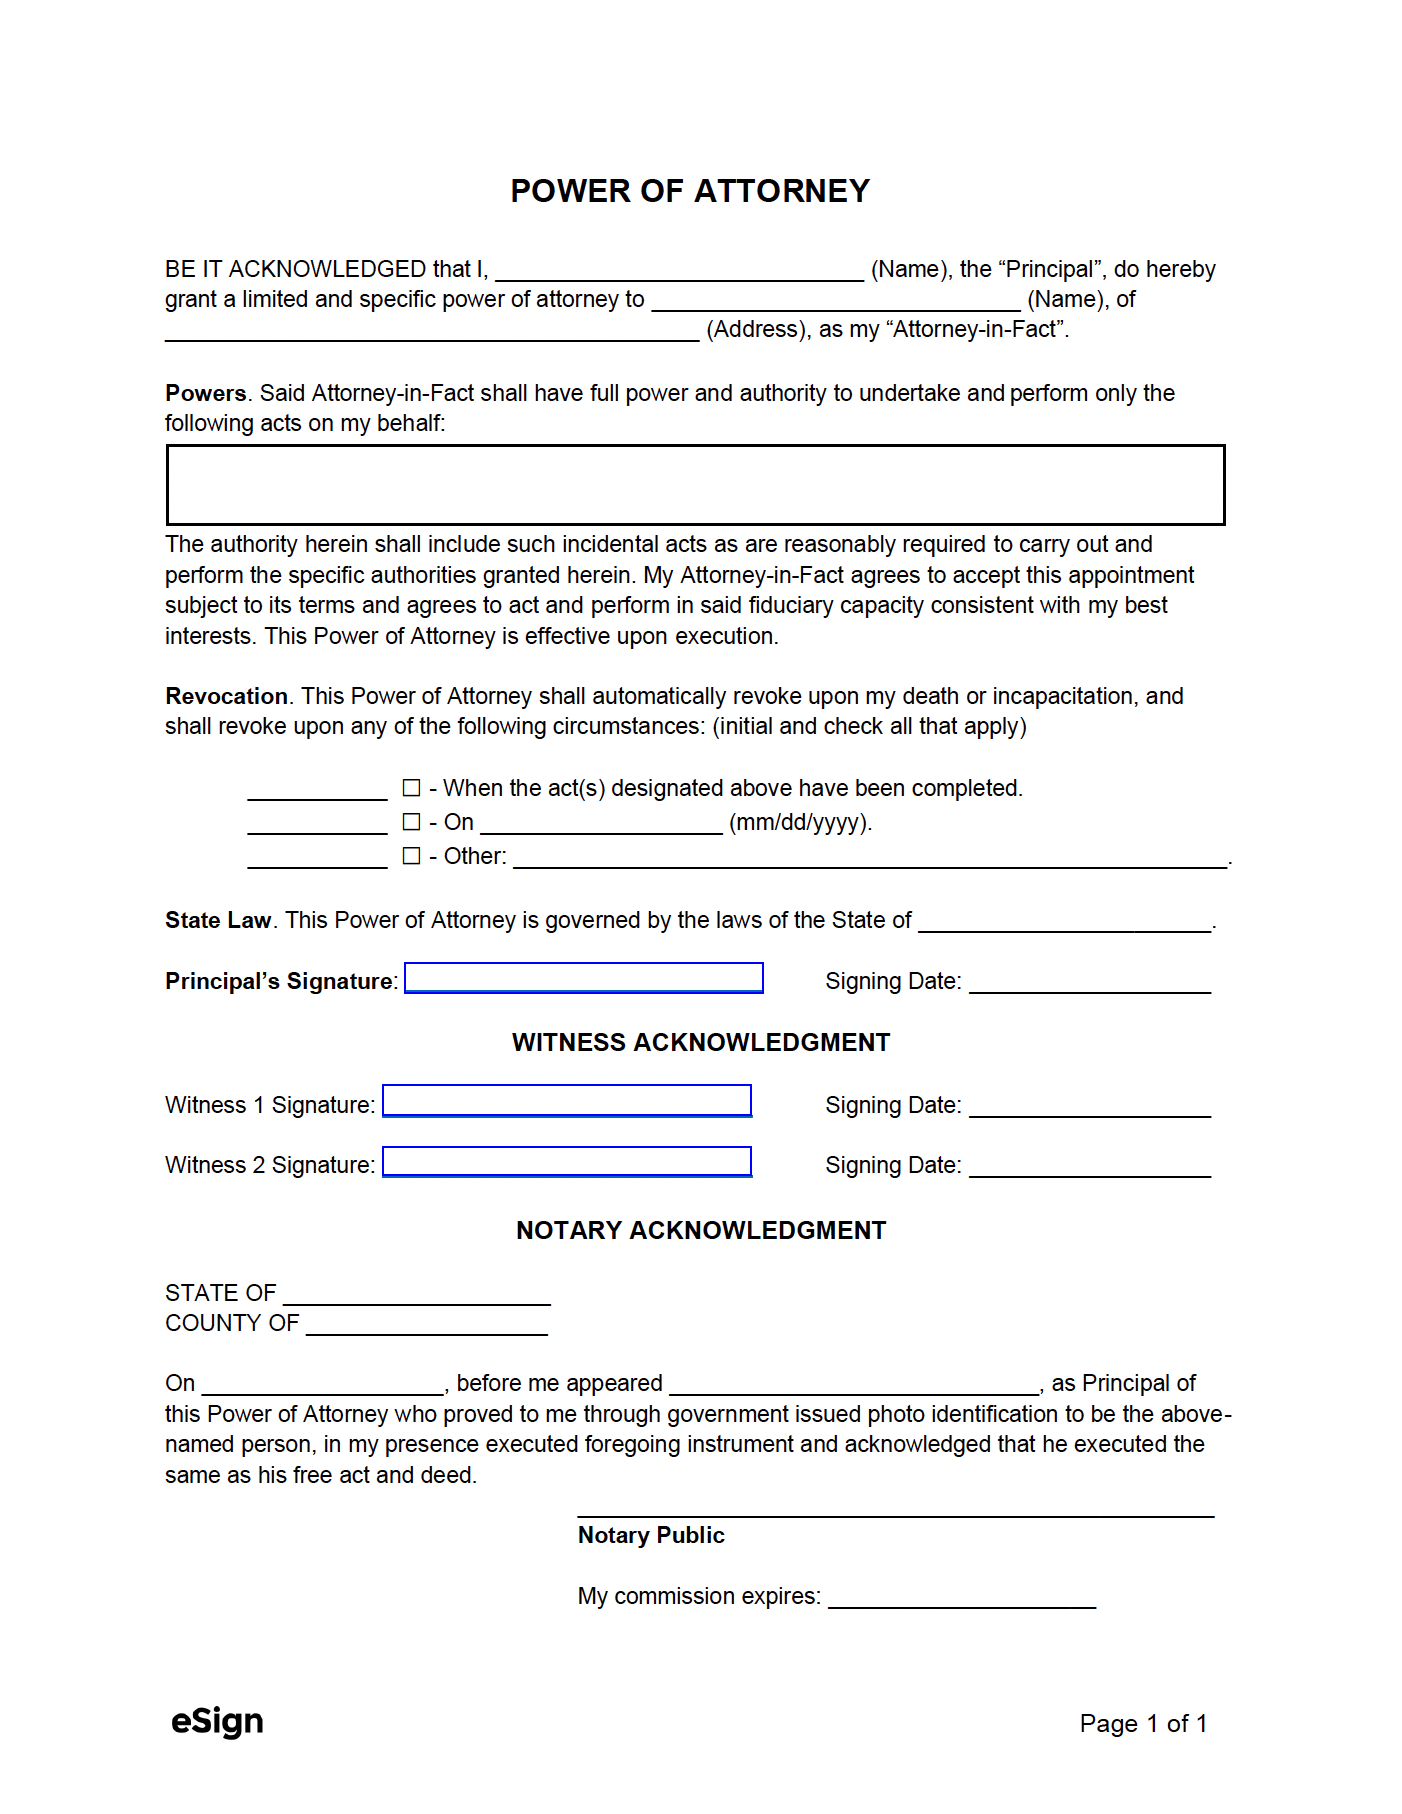 free-power-of-attorney-forms-11-pdf-word